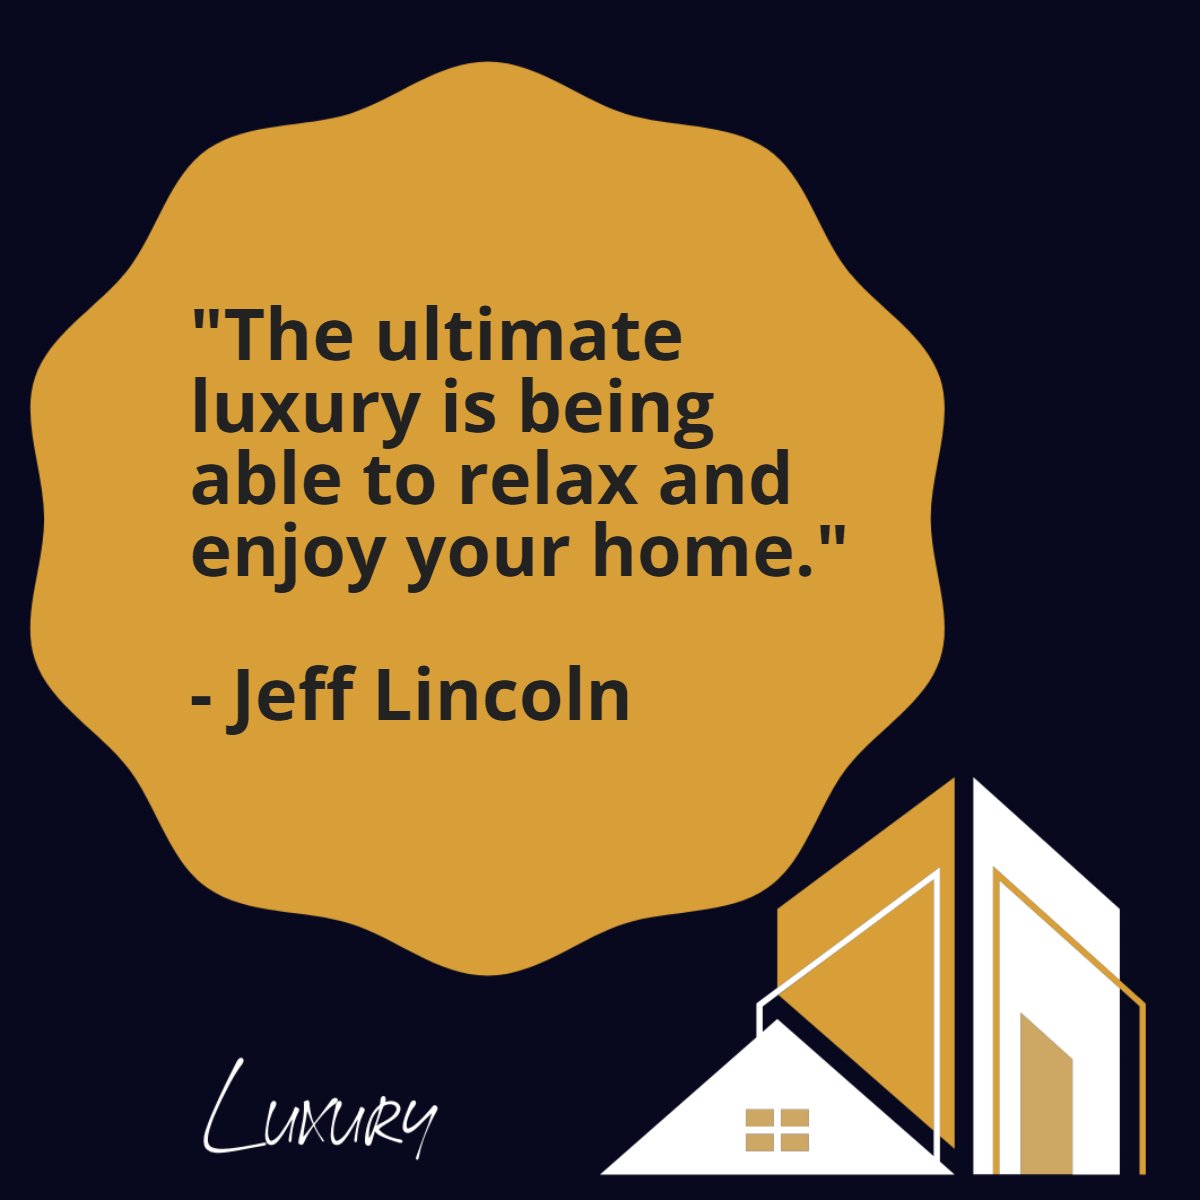 'The ultimate luxury is being able to relax and enjoy your home'
― Jeff Lincoln 📖

#luxurylifestyle #luxury #lovemyhome #home #lifestyle #jefflincoln #quote #quoteoftheday✏️ 
 #gentlegiant #gentlegiantrealtor #thegentlegiant #thegentlegiantrealtor #realtor